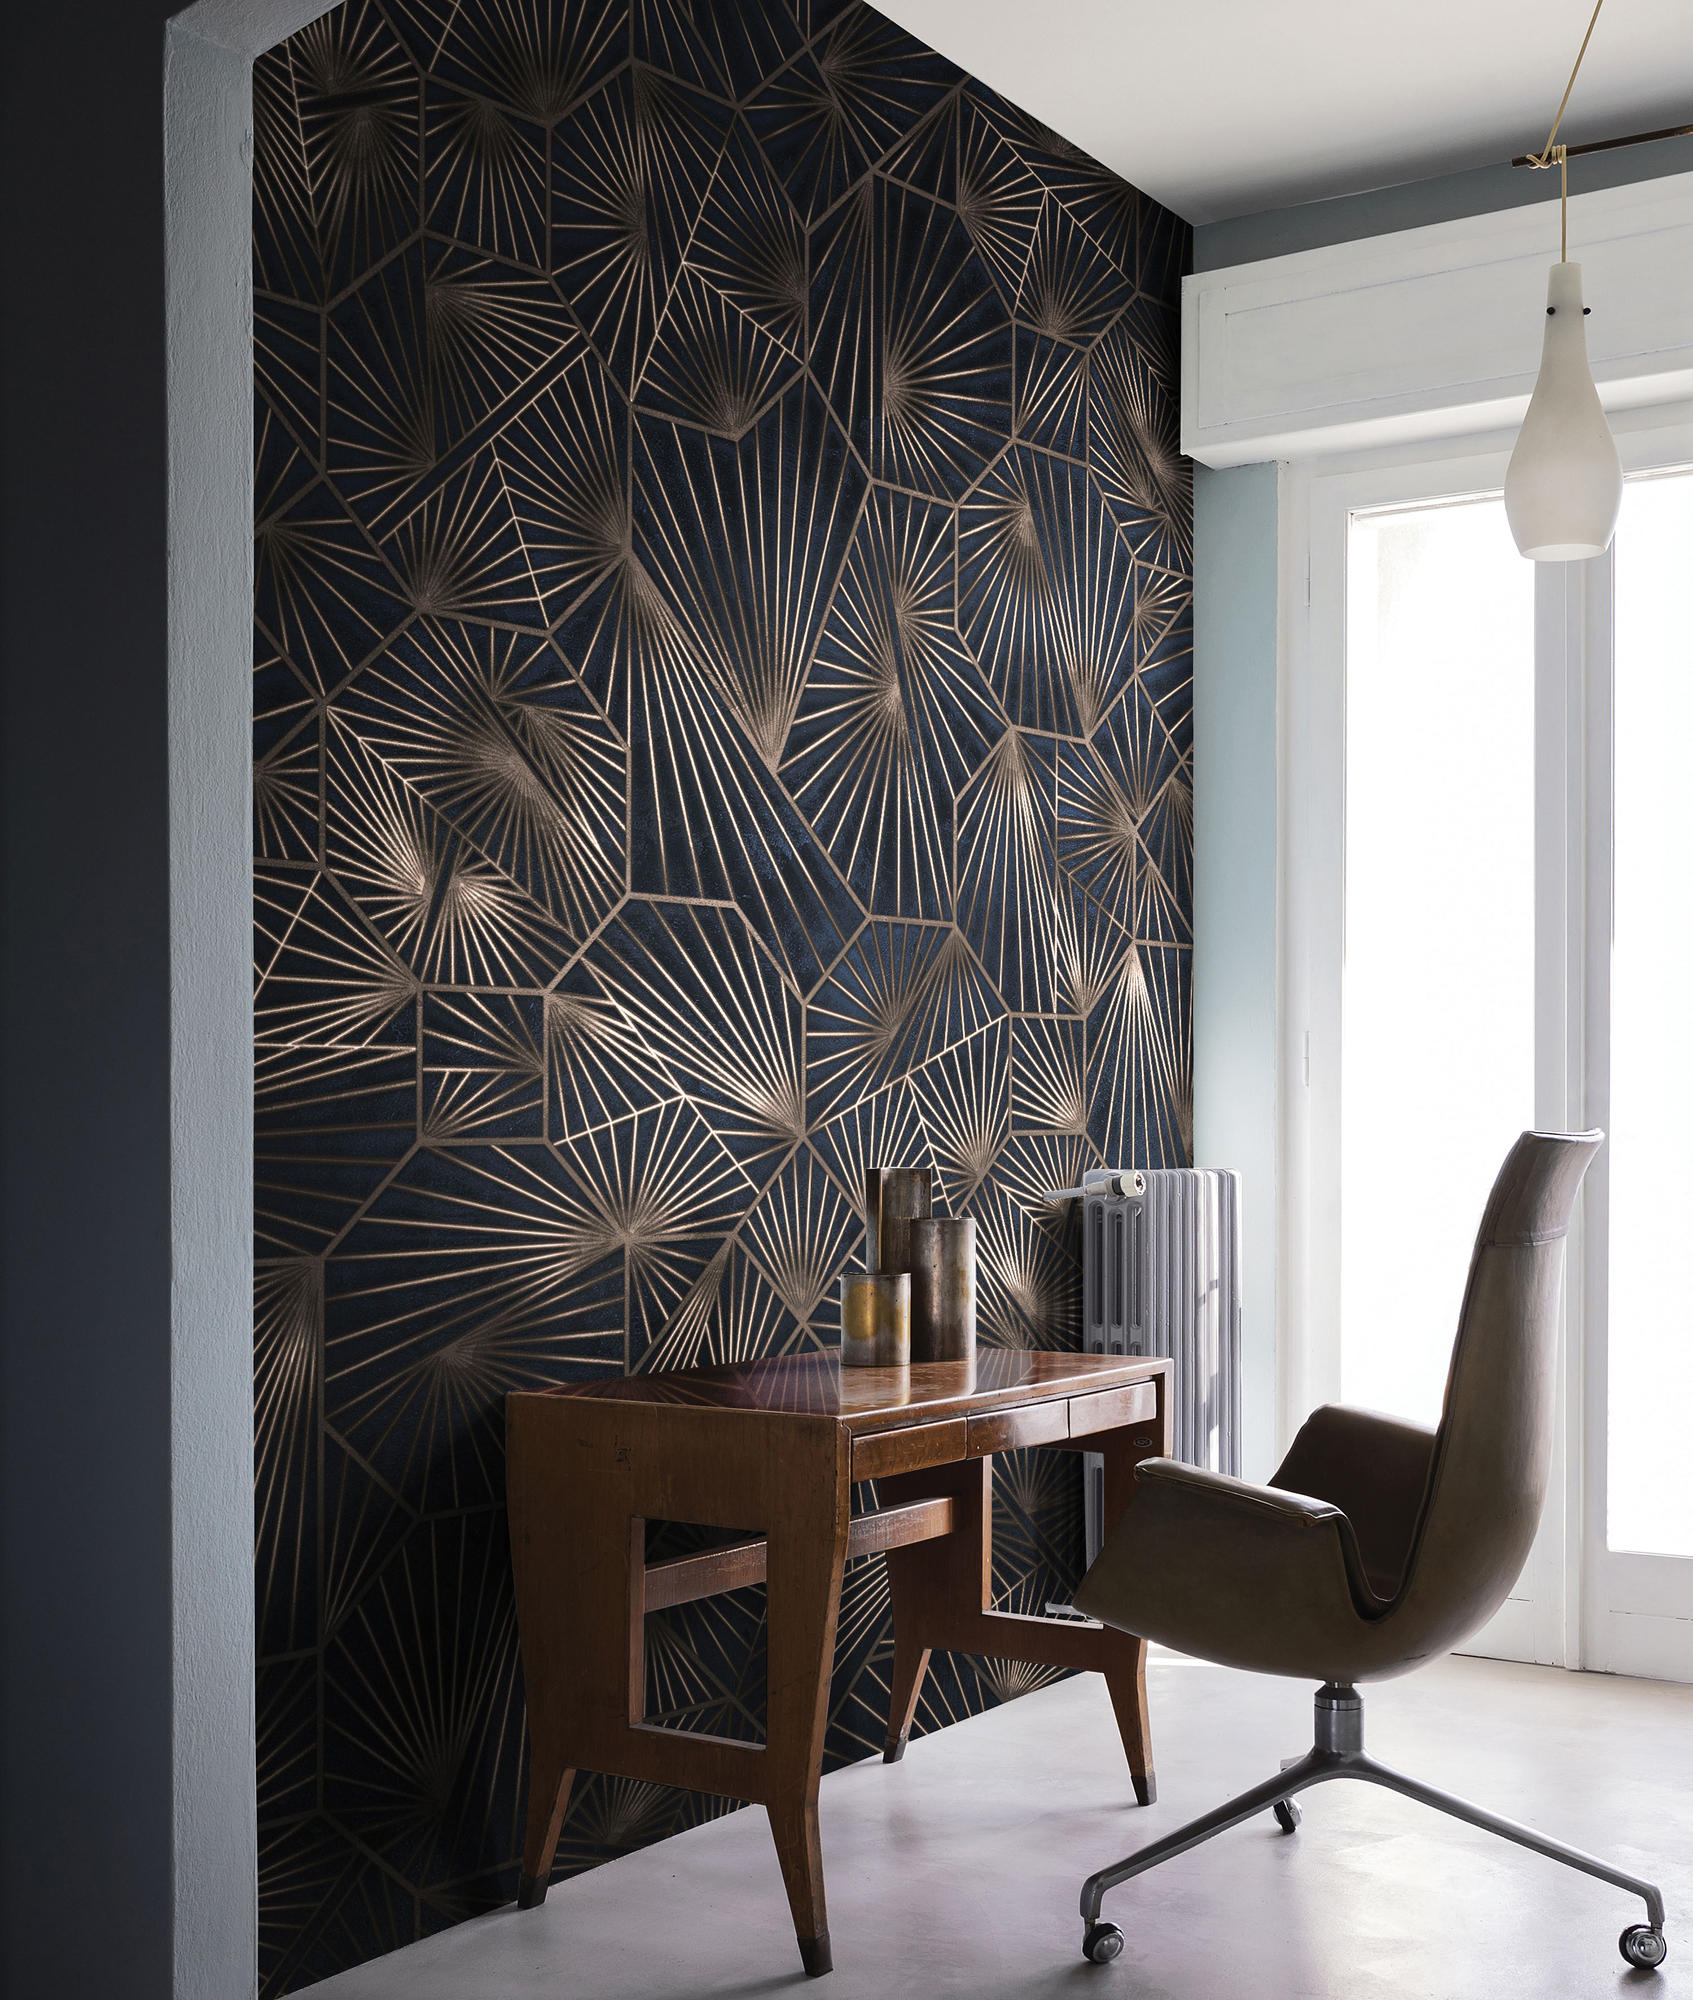 INTOLLERHANDY - coverings / LONDONART | Architonic